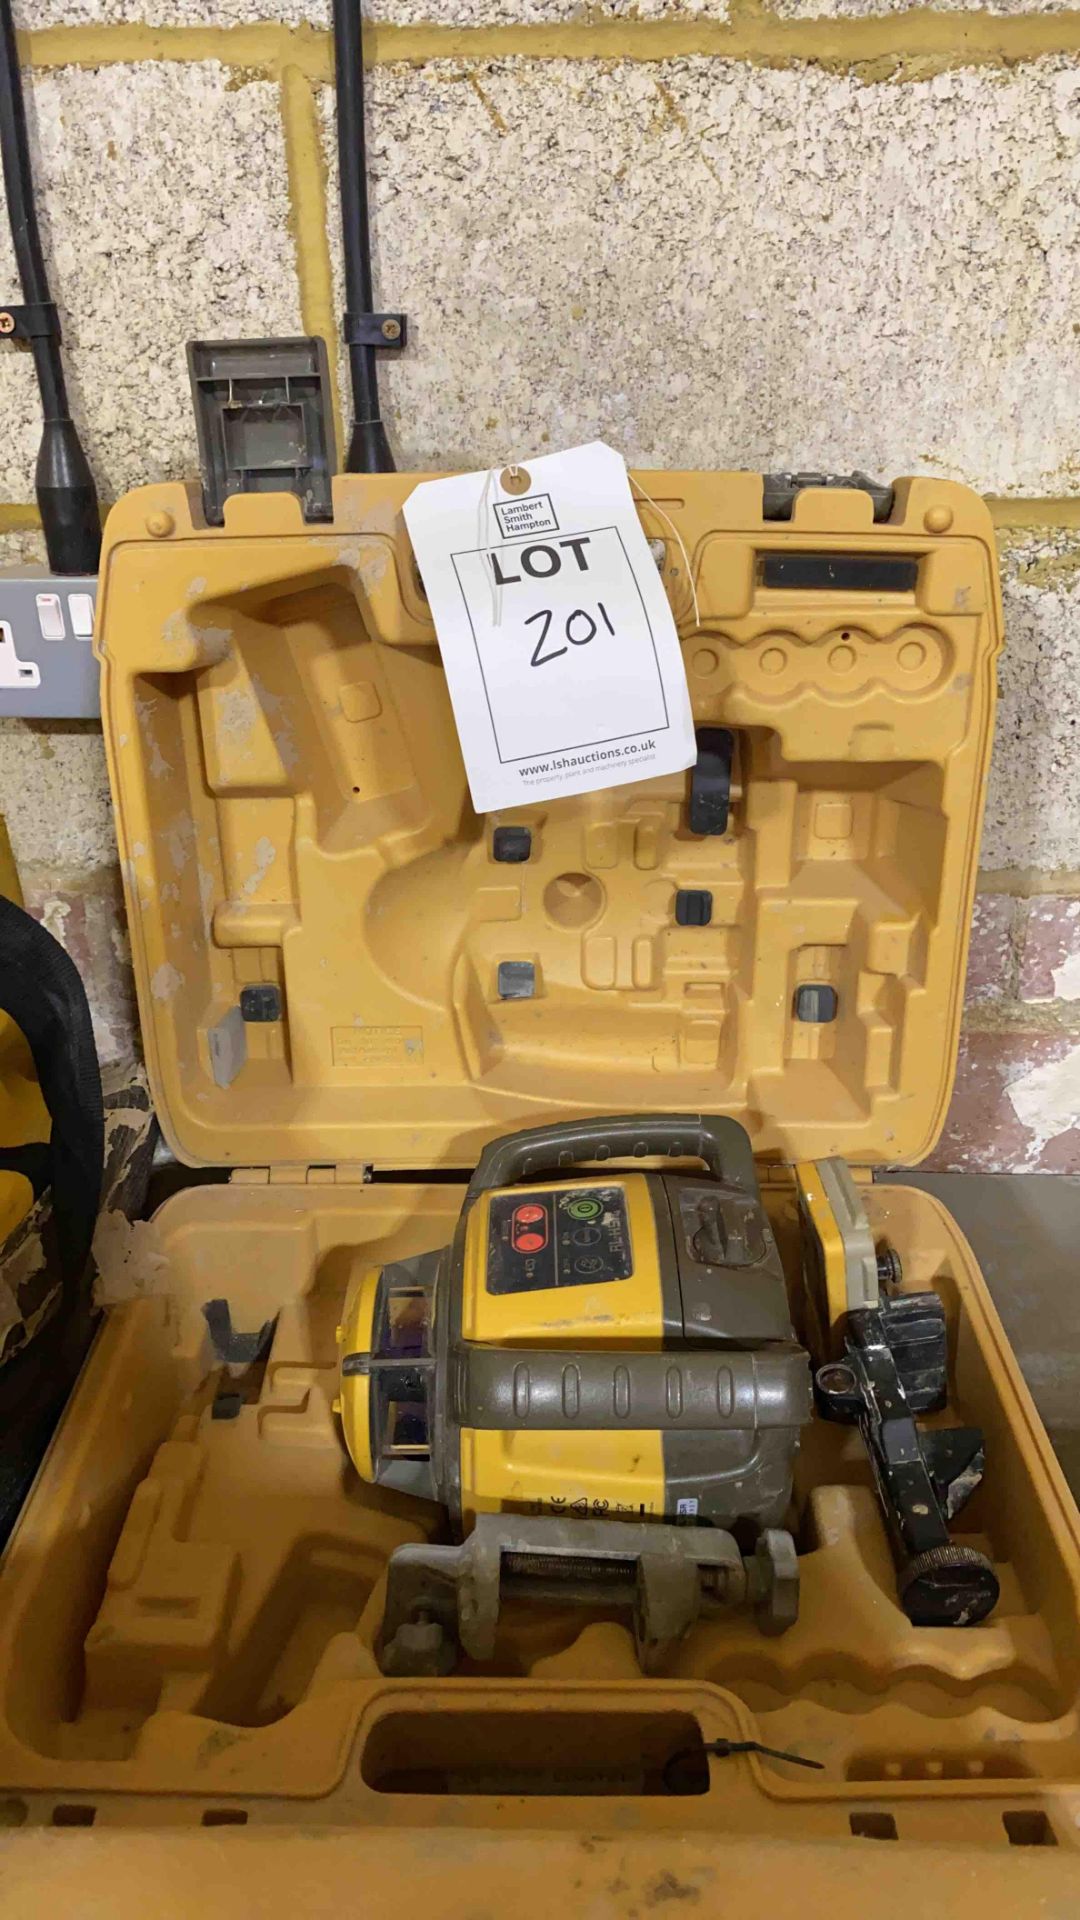 Topcon RL-H5 laser level complete with carry case and top con LS-80L handheld control